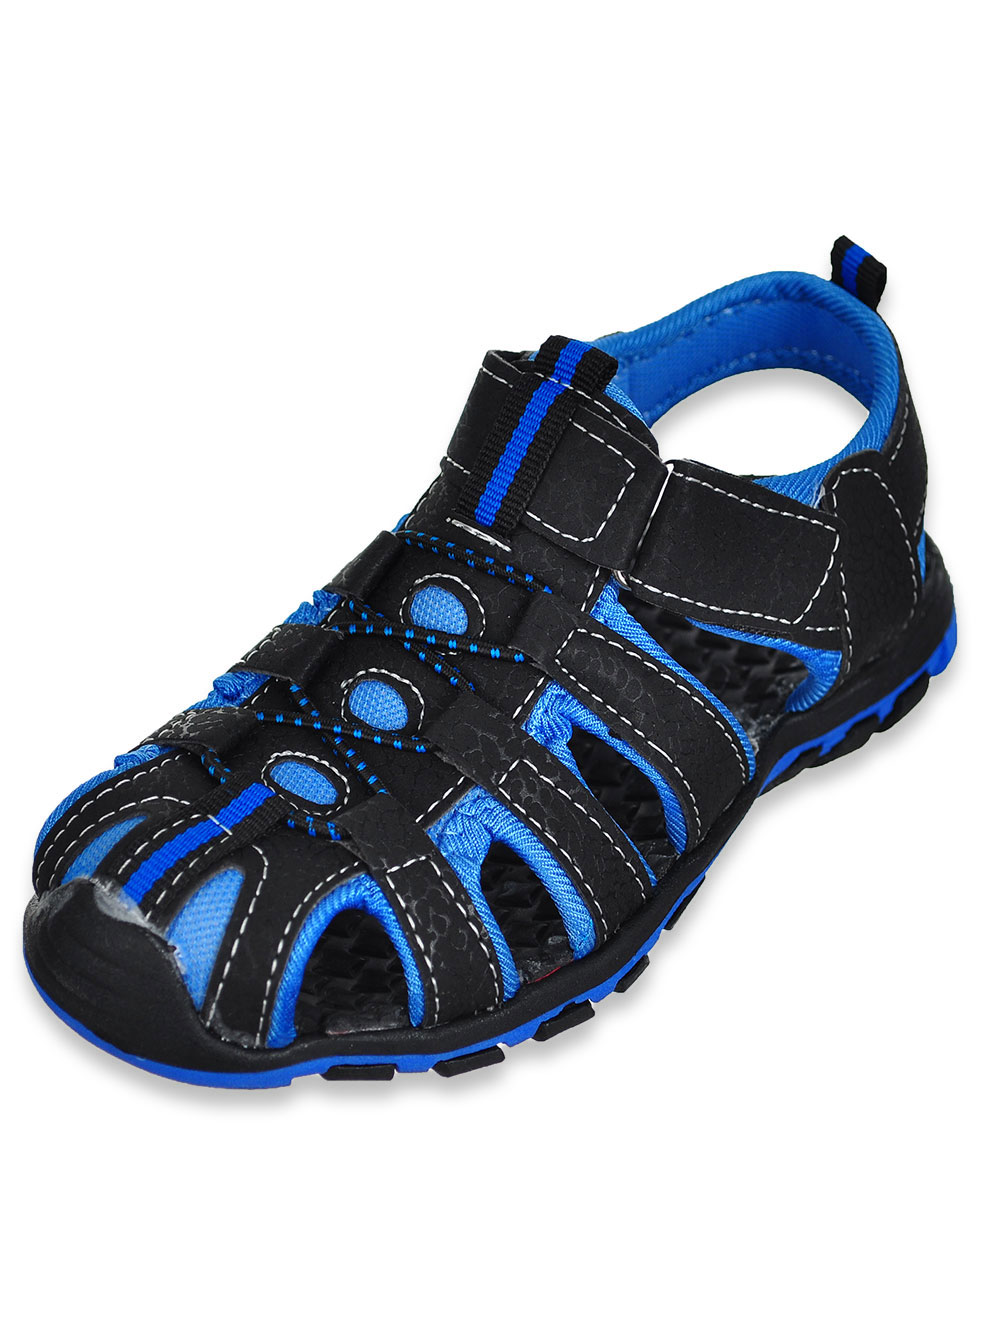 Boys Black and Blue Sandals